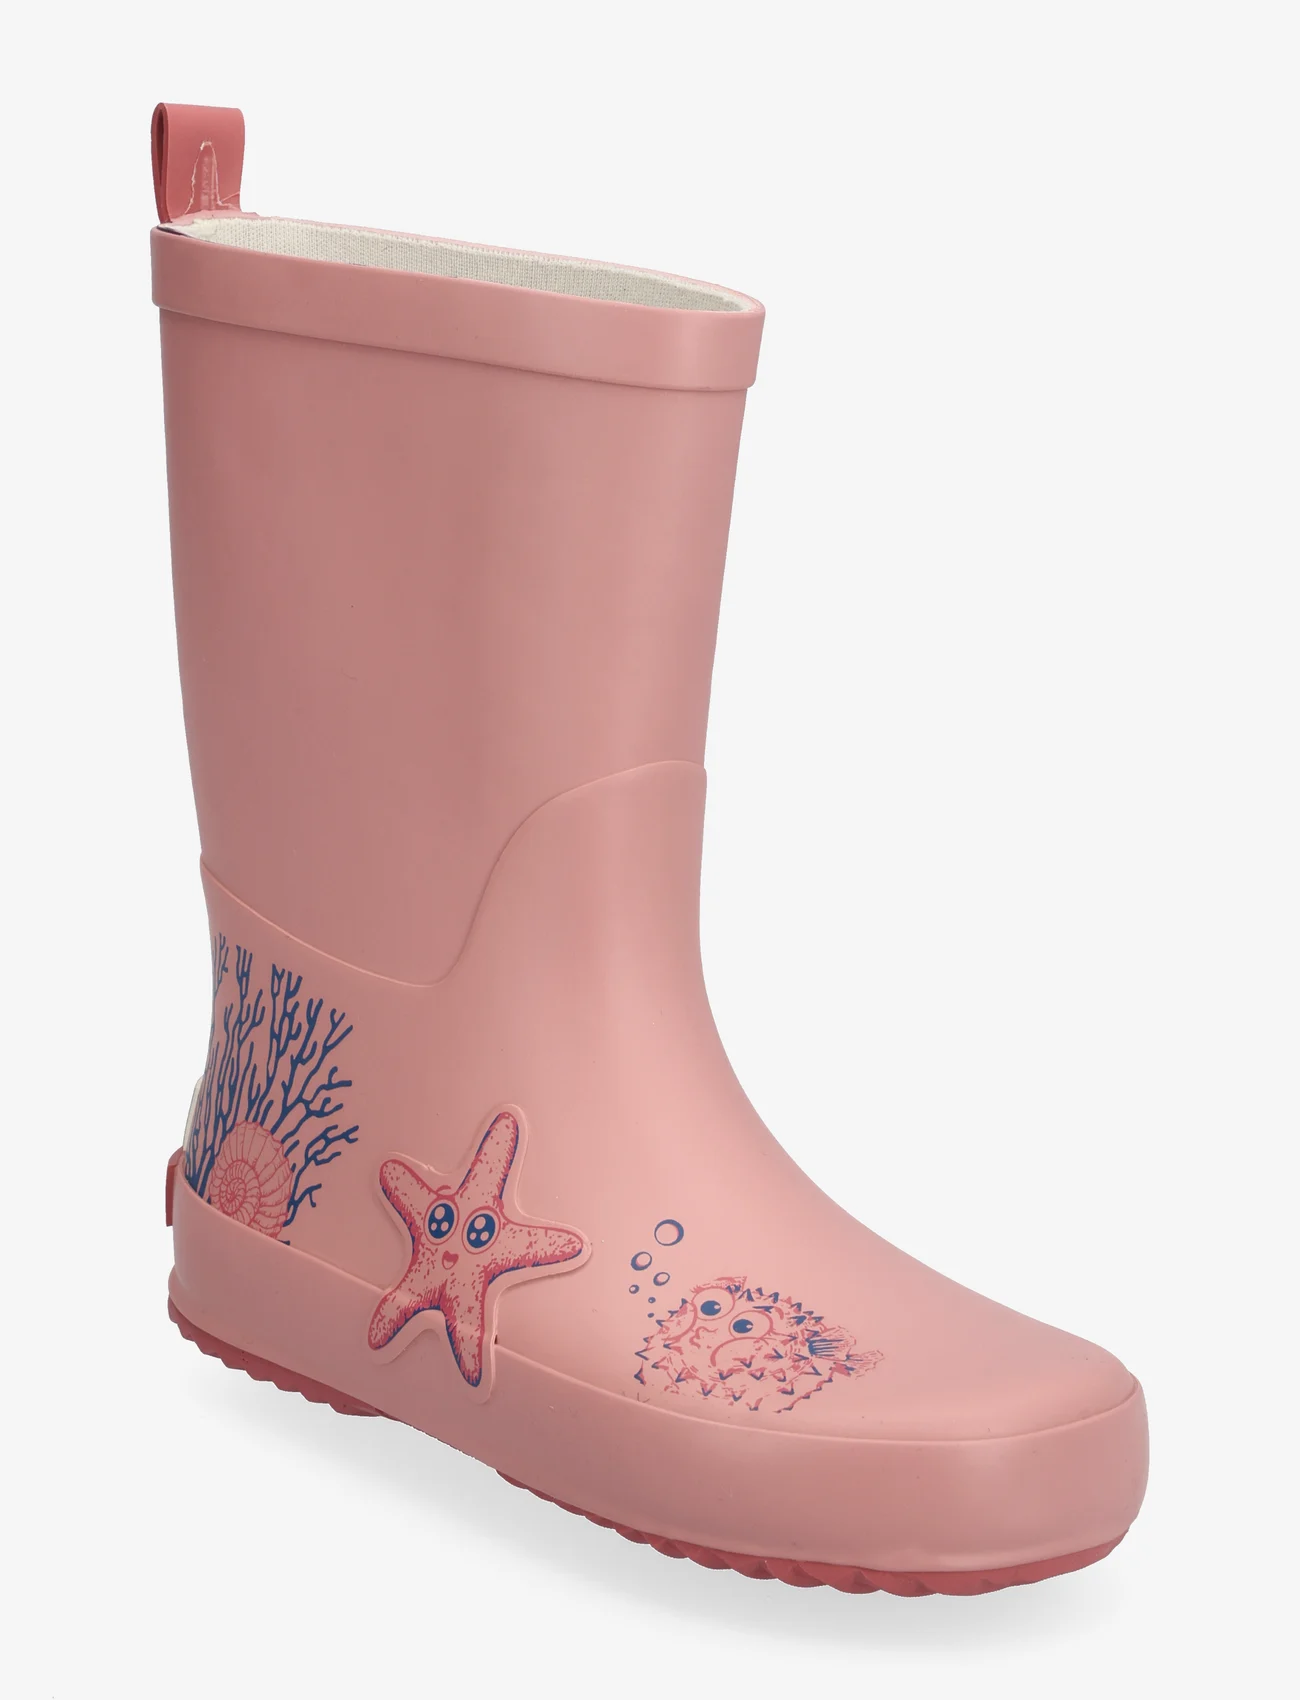 CeLaVi - Wellies - Oceania - unlined rubberboots - brandied apricot - 0